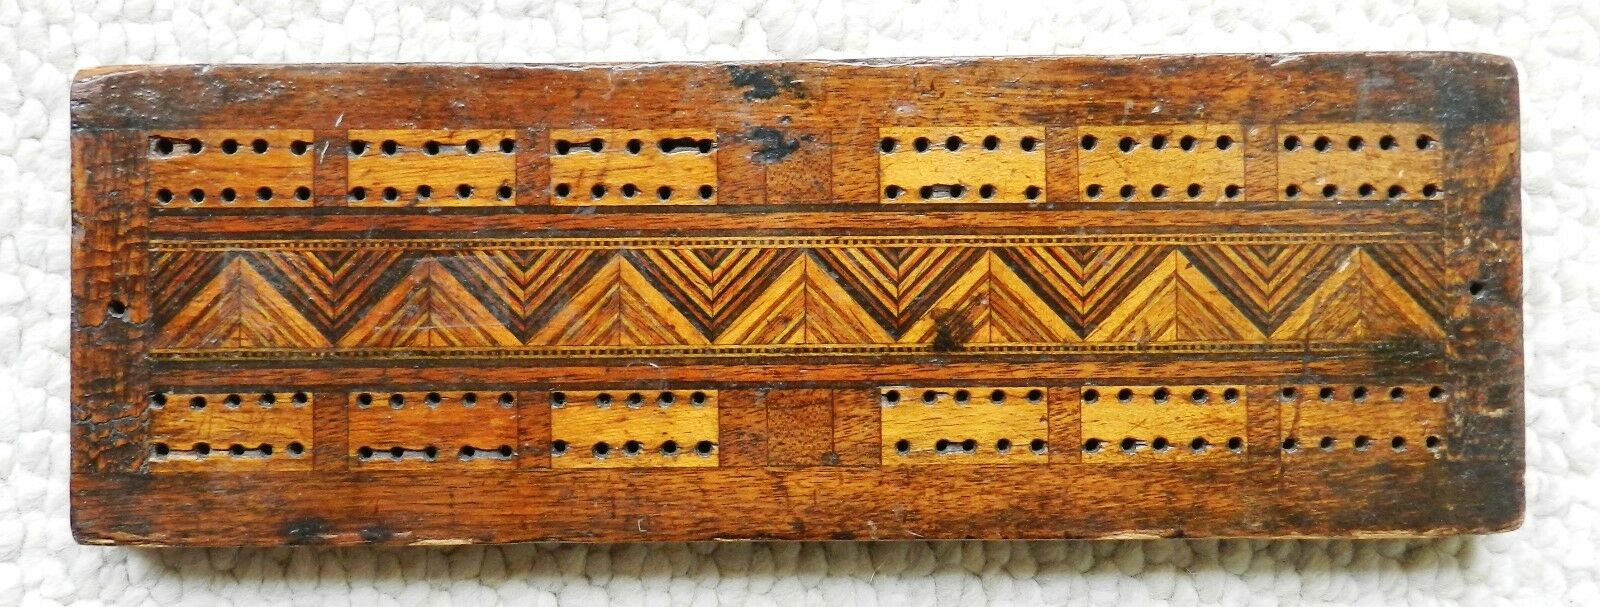 Antique 19th Century Early 1800's Inlaid Wood Cribbage Board Marquetry